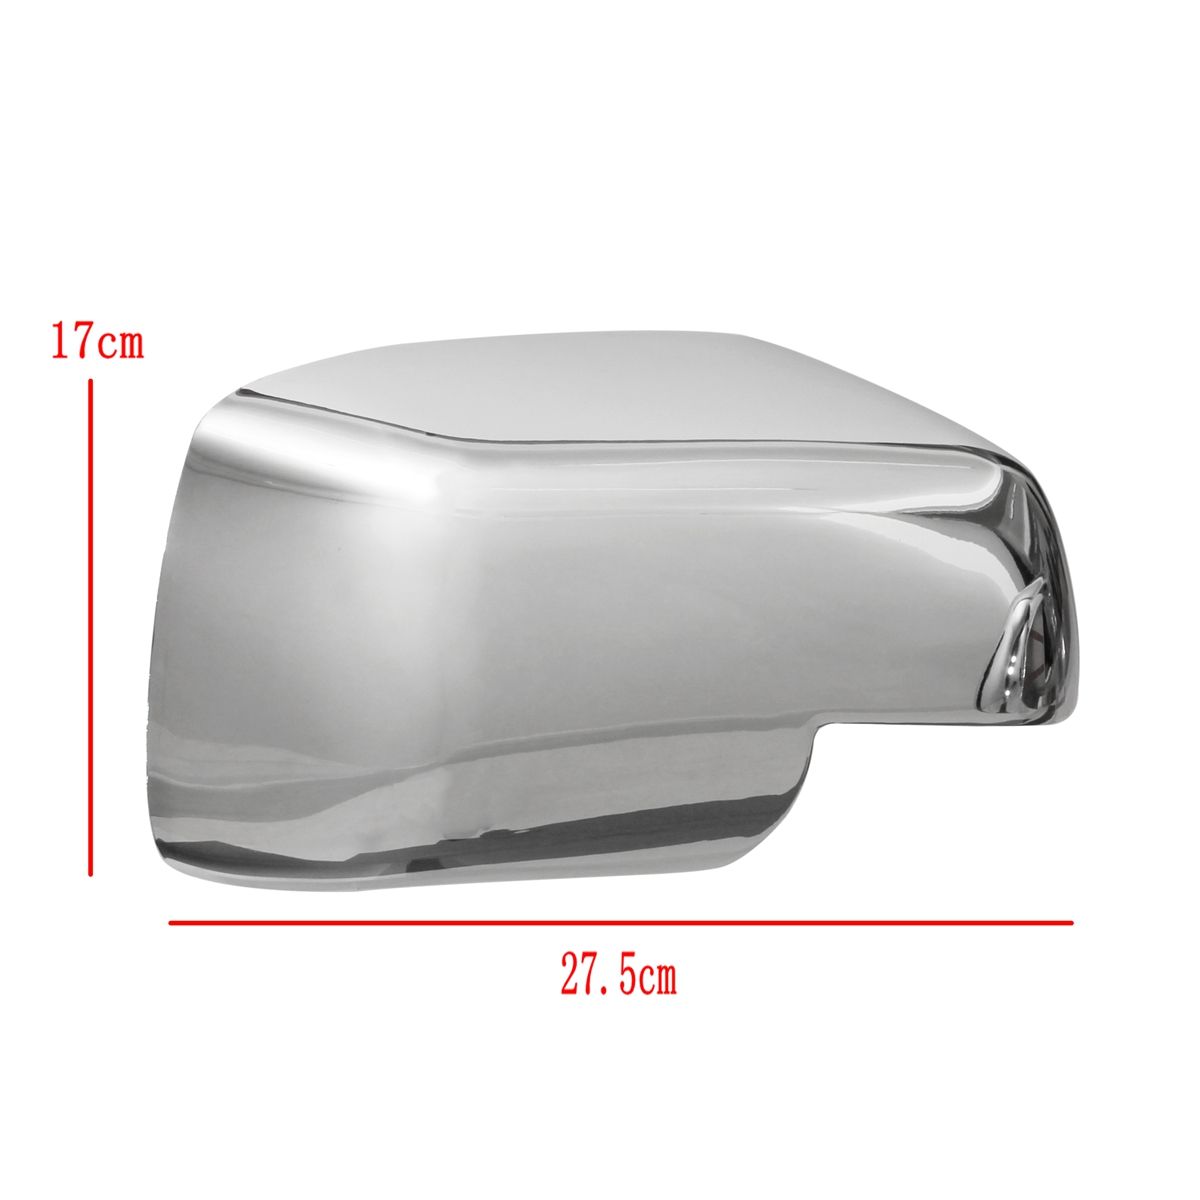 Pair-Full-Chrome-Car-Wing-Side-Mirror-Cover-Caps-For-Land-Rover-Discovery-Freelander-2-1583941